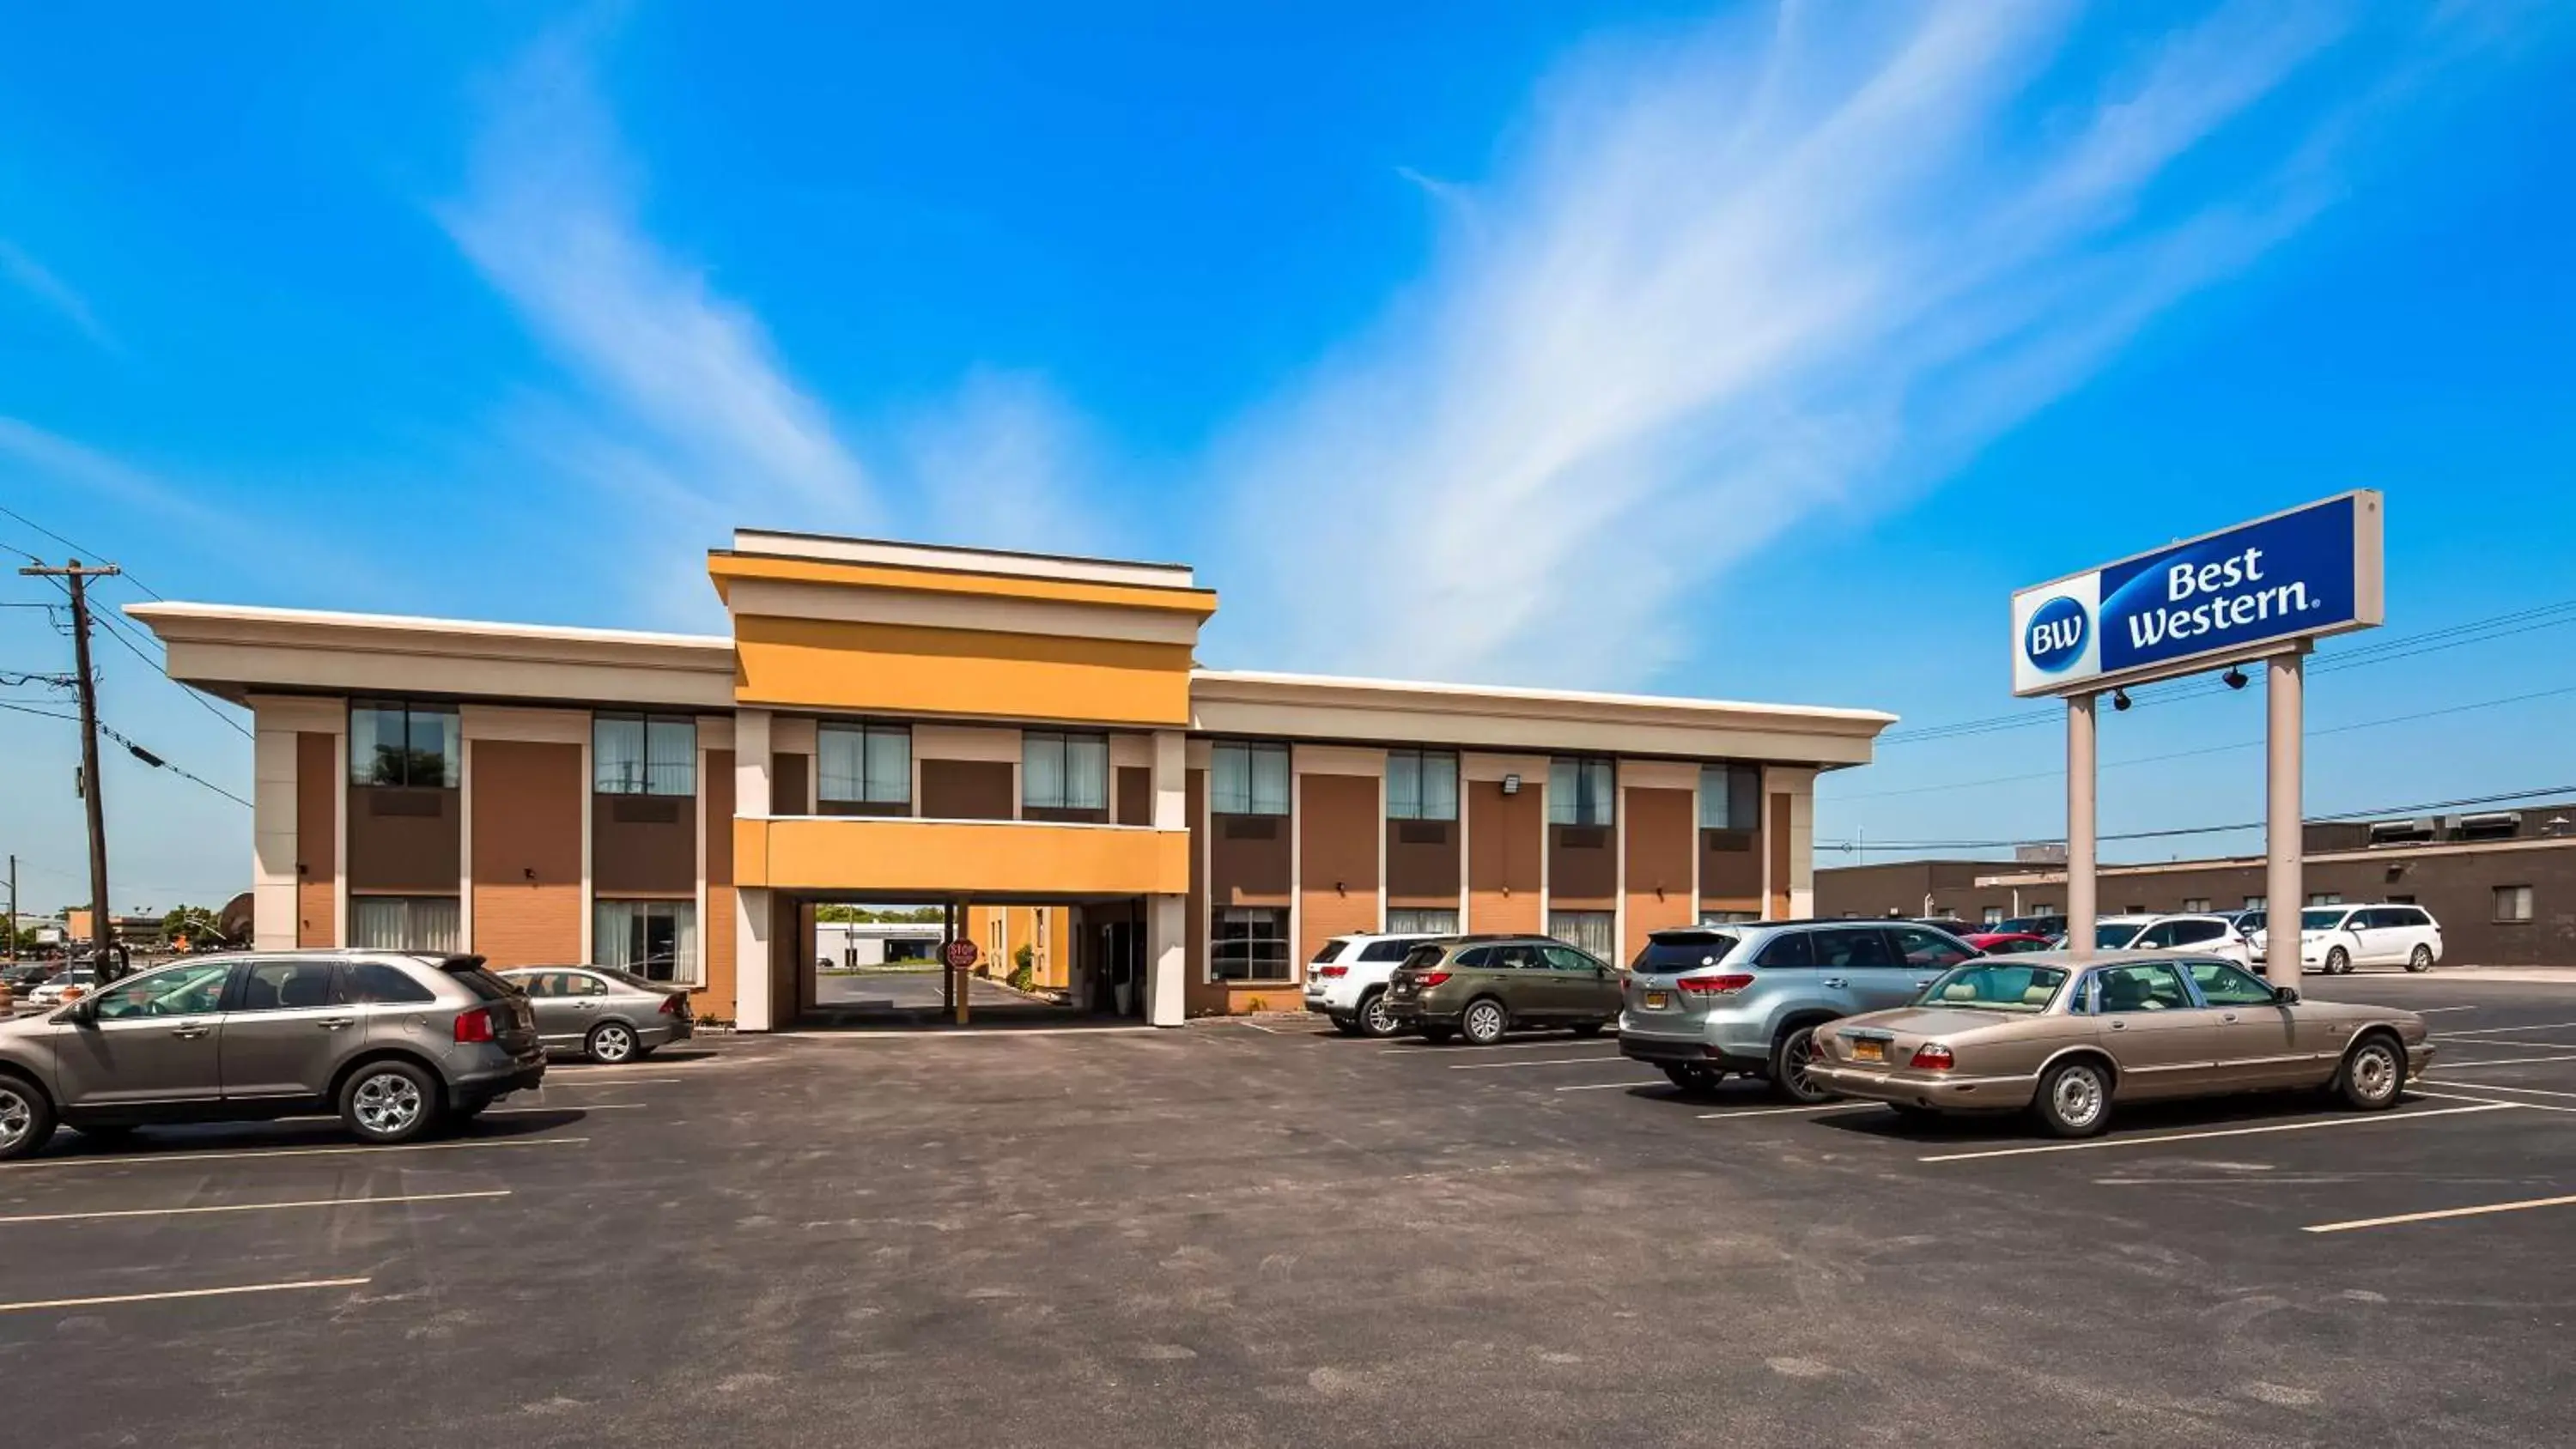 Property building in Best Western Inn at the Rochester Airport